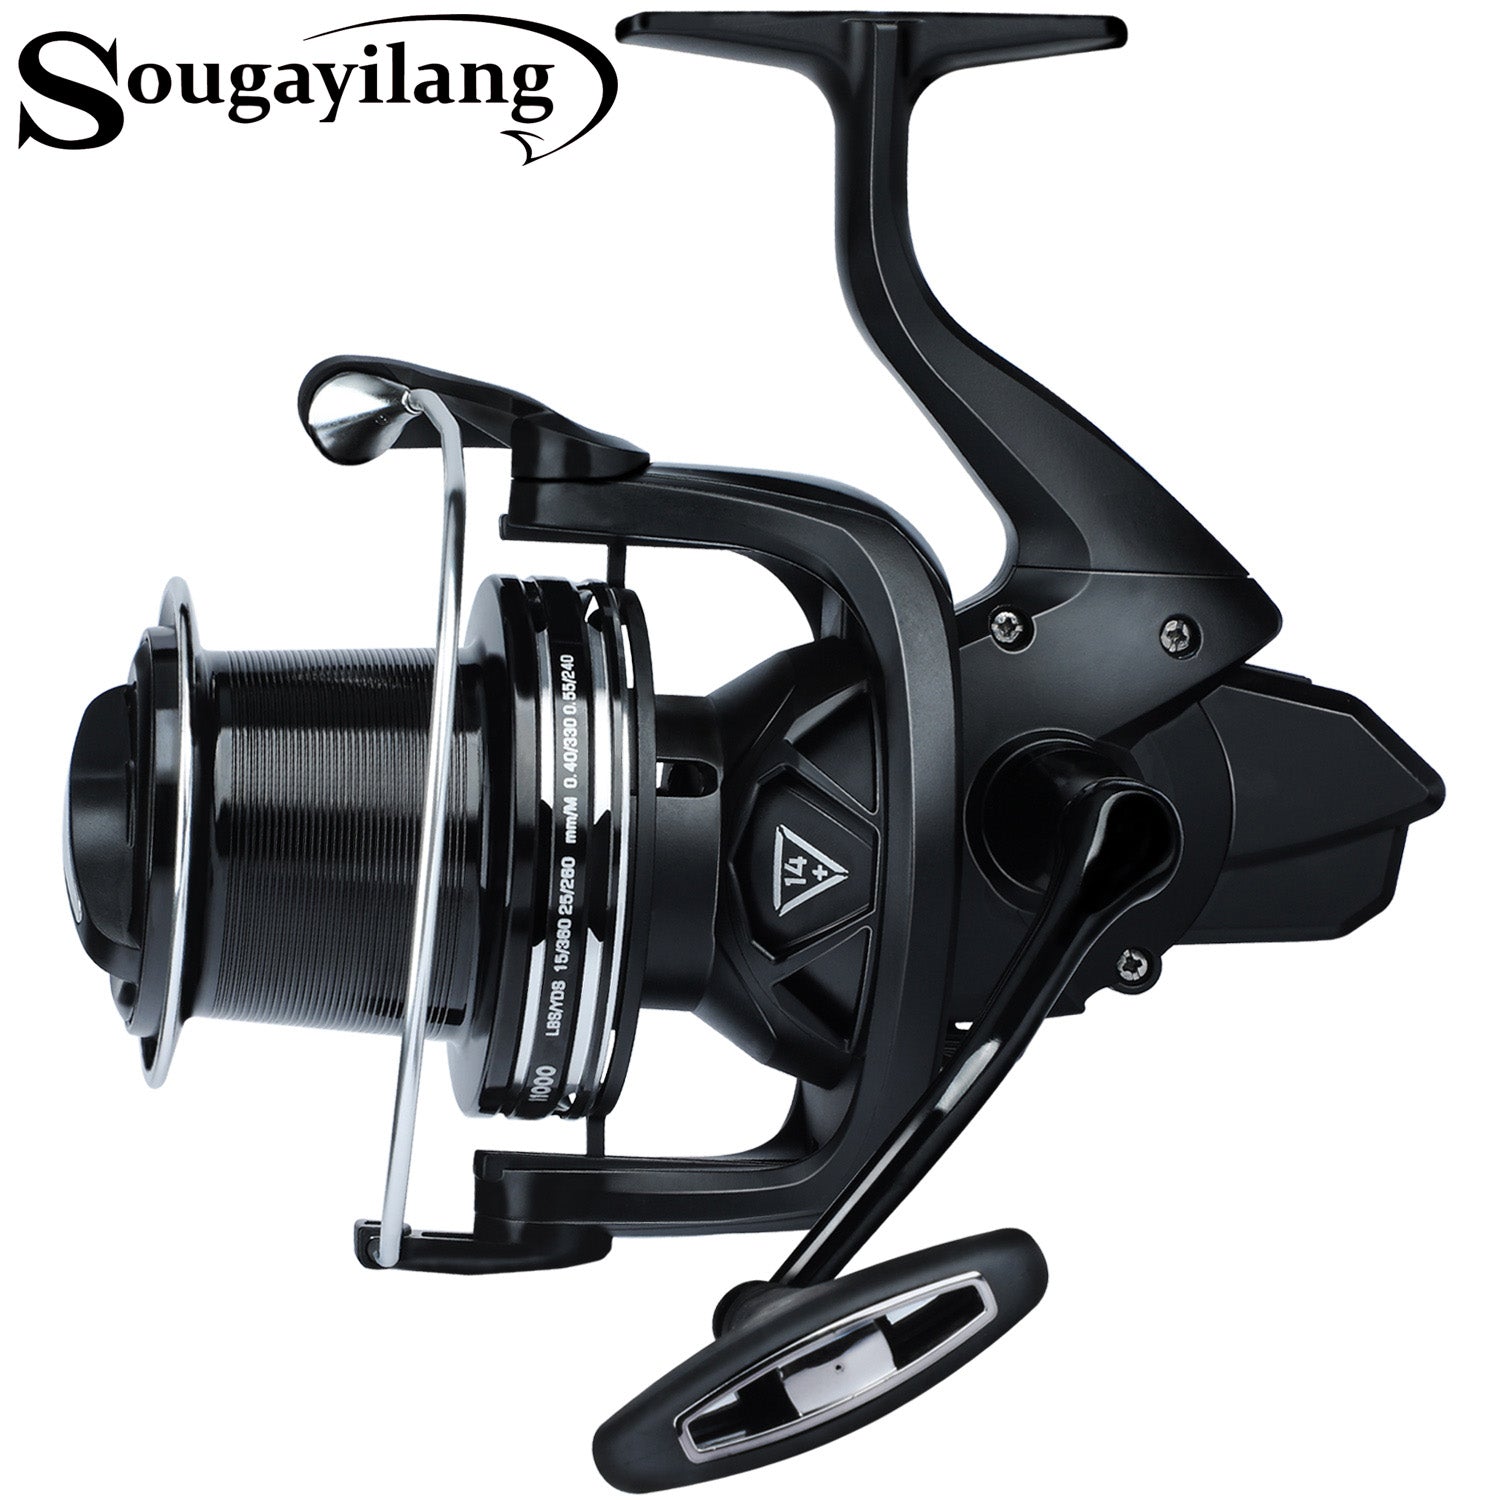  Sougayilang Spinning Fishing Reel, 5.2:1 High Speed Spinning  Reel, Lightweight 11+1BB Ultra Smooth for Saltwater or Freshwater - GT1000  : Sports & Outdoors